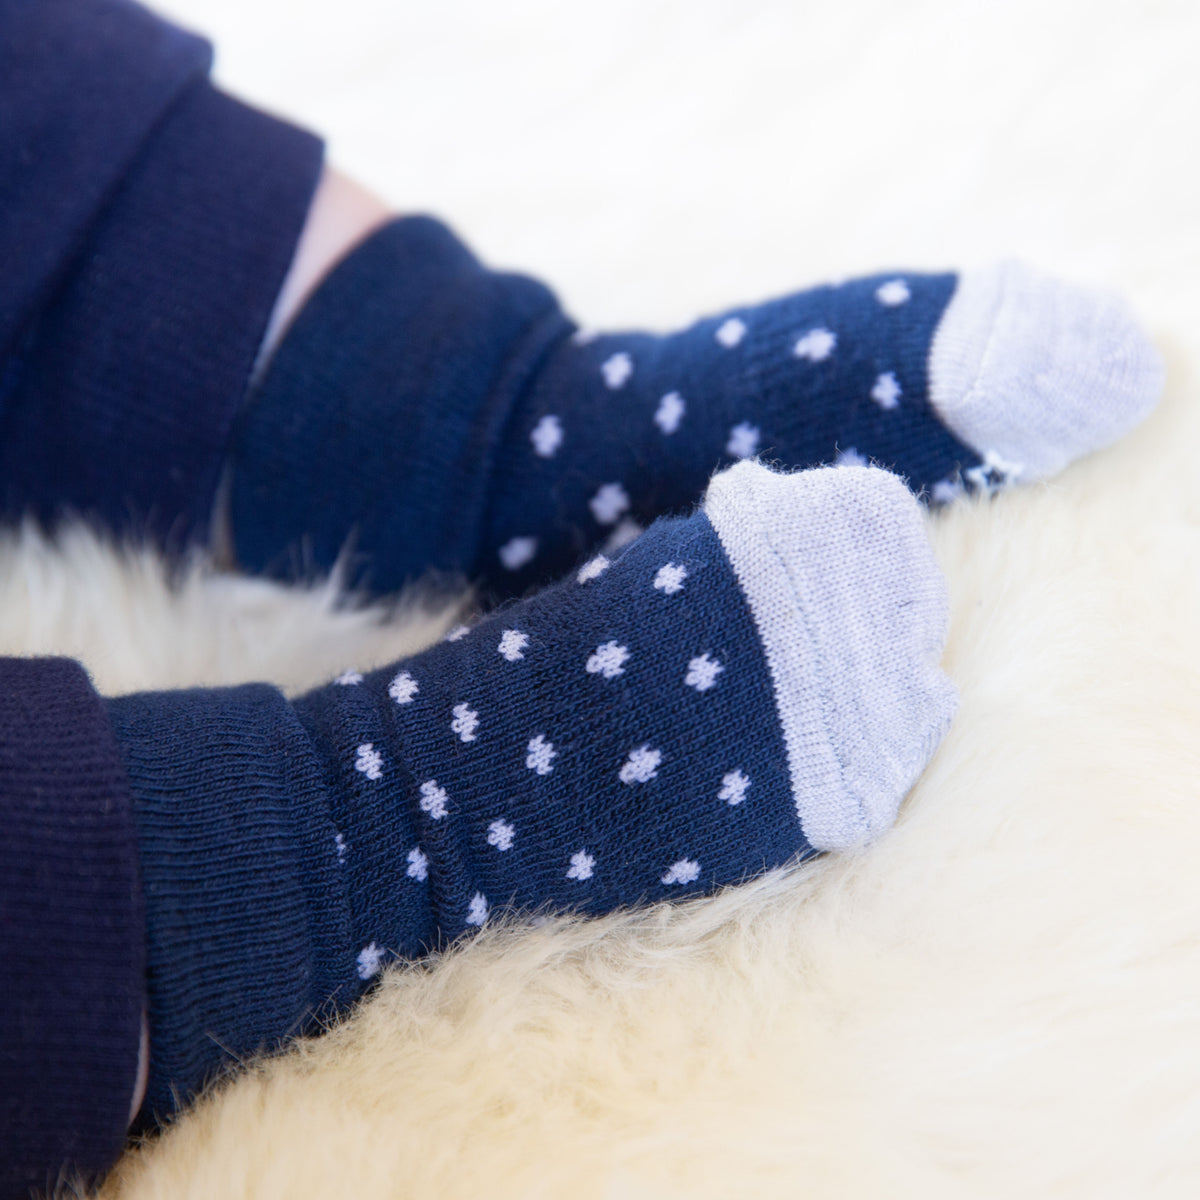 Non-Slip Stay On Baby and Toddler Socks - 3 Pack in Shades of Blue with Navy